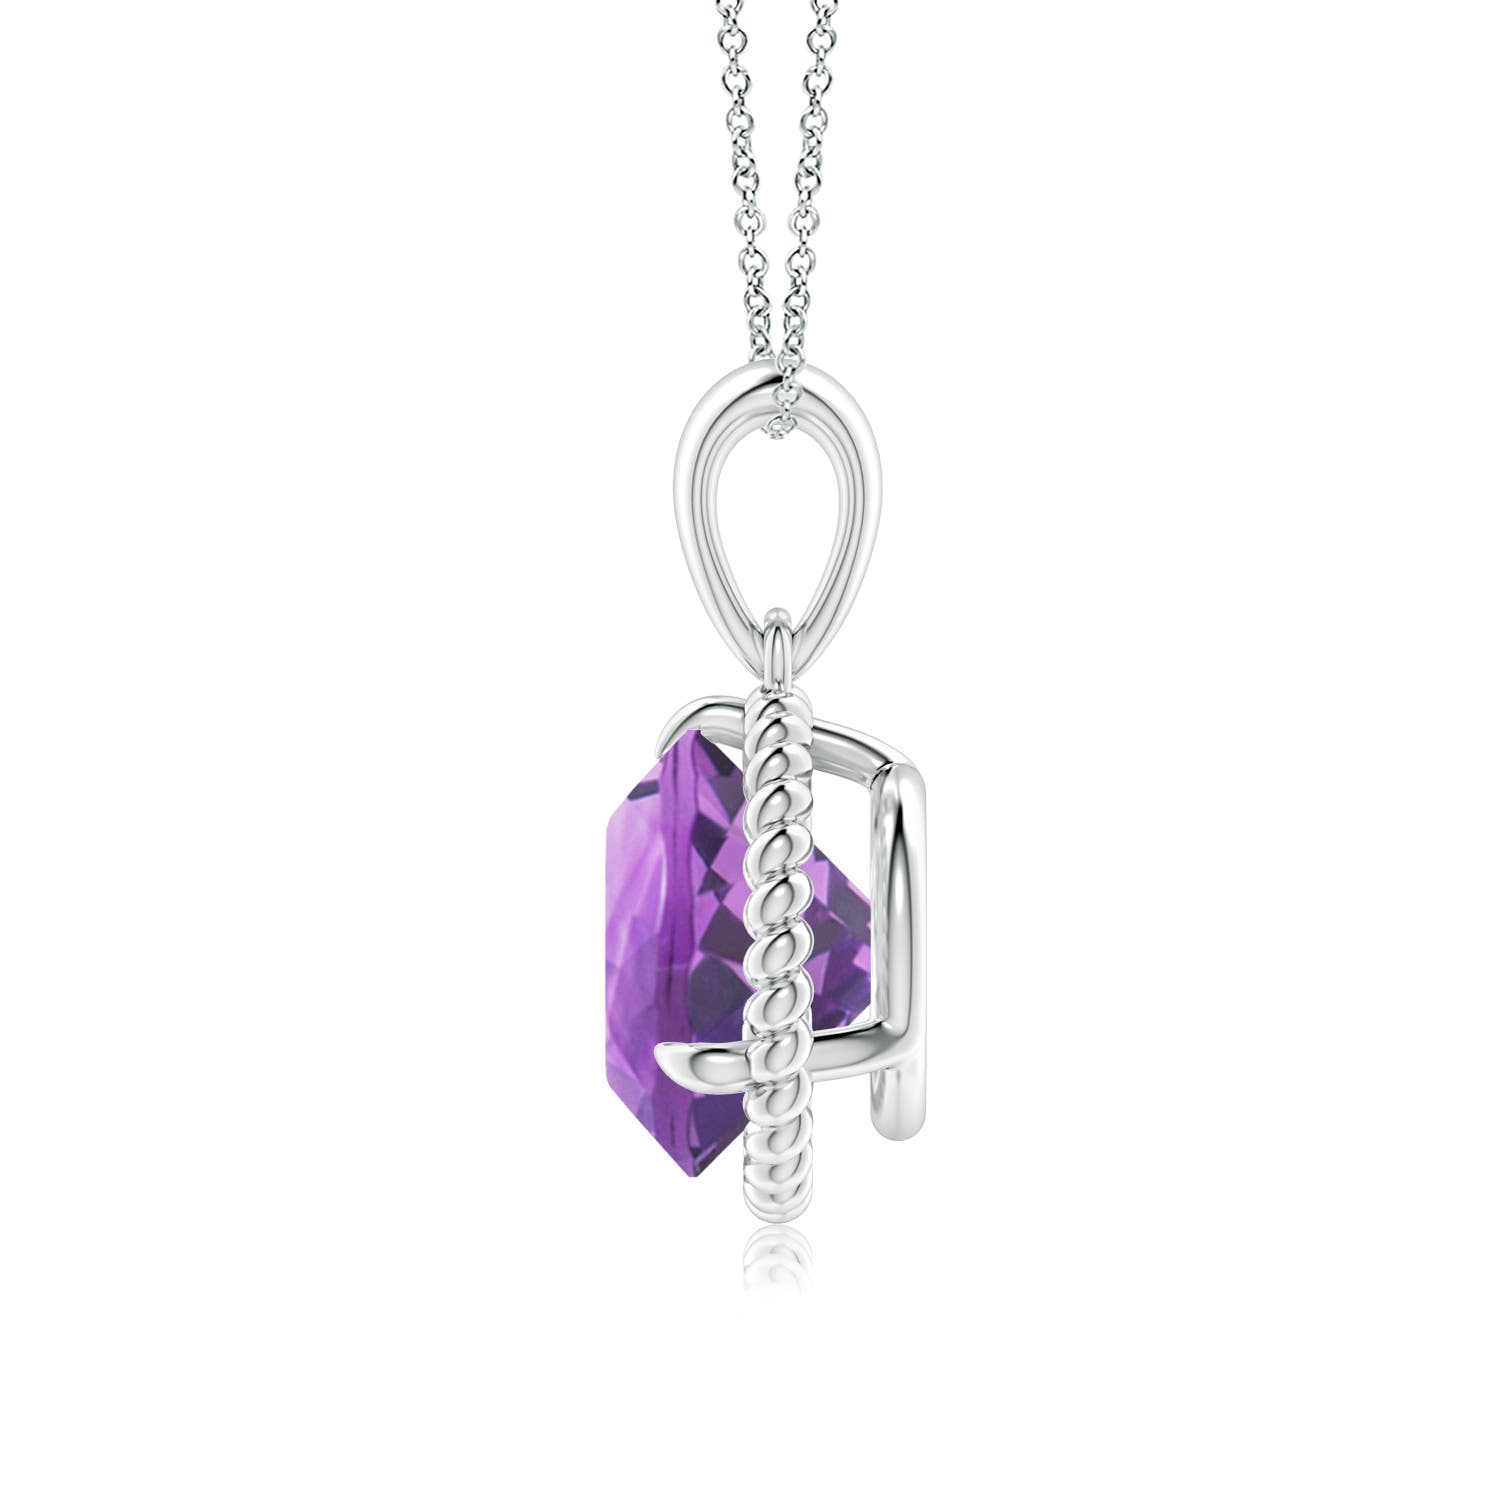 A - Amethyst / 2.45 CT / 14 KT White Gold